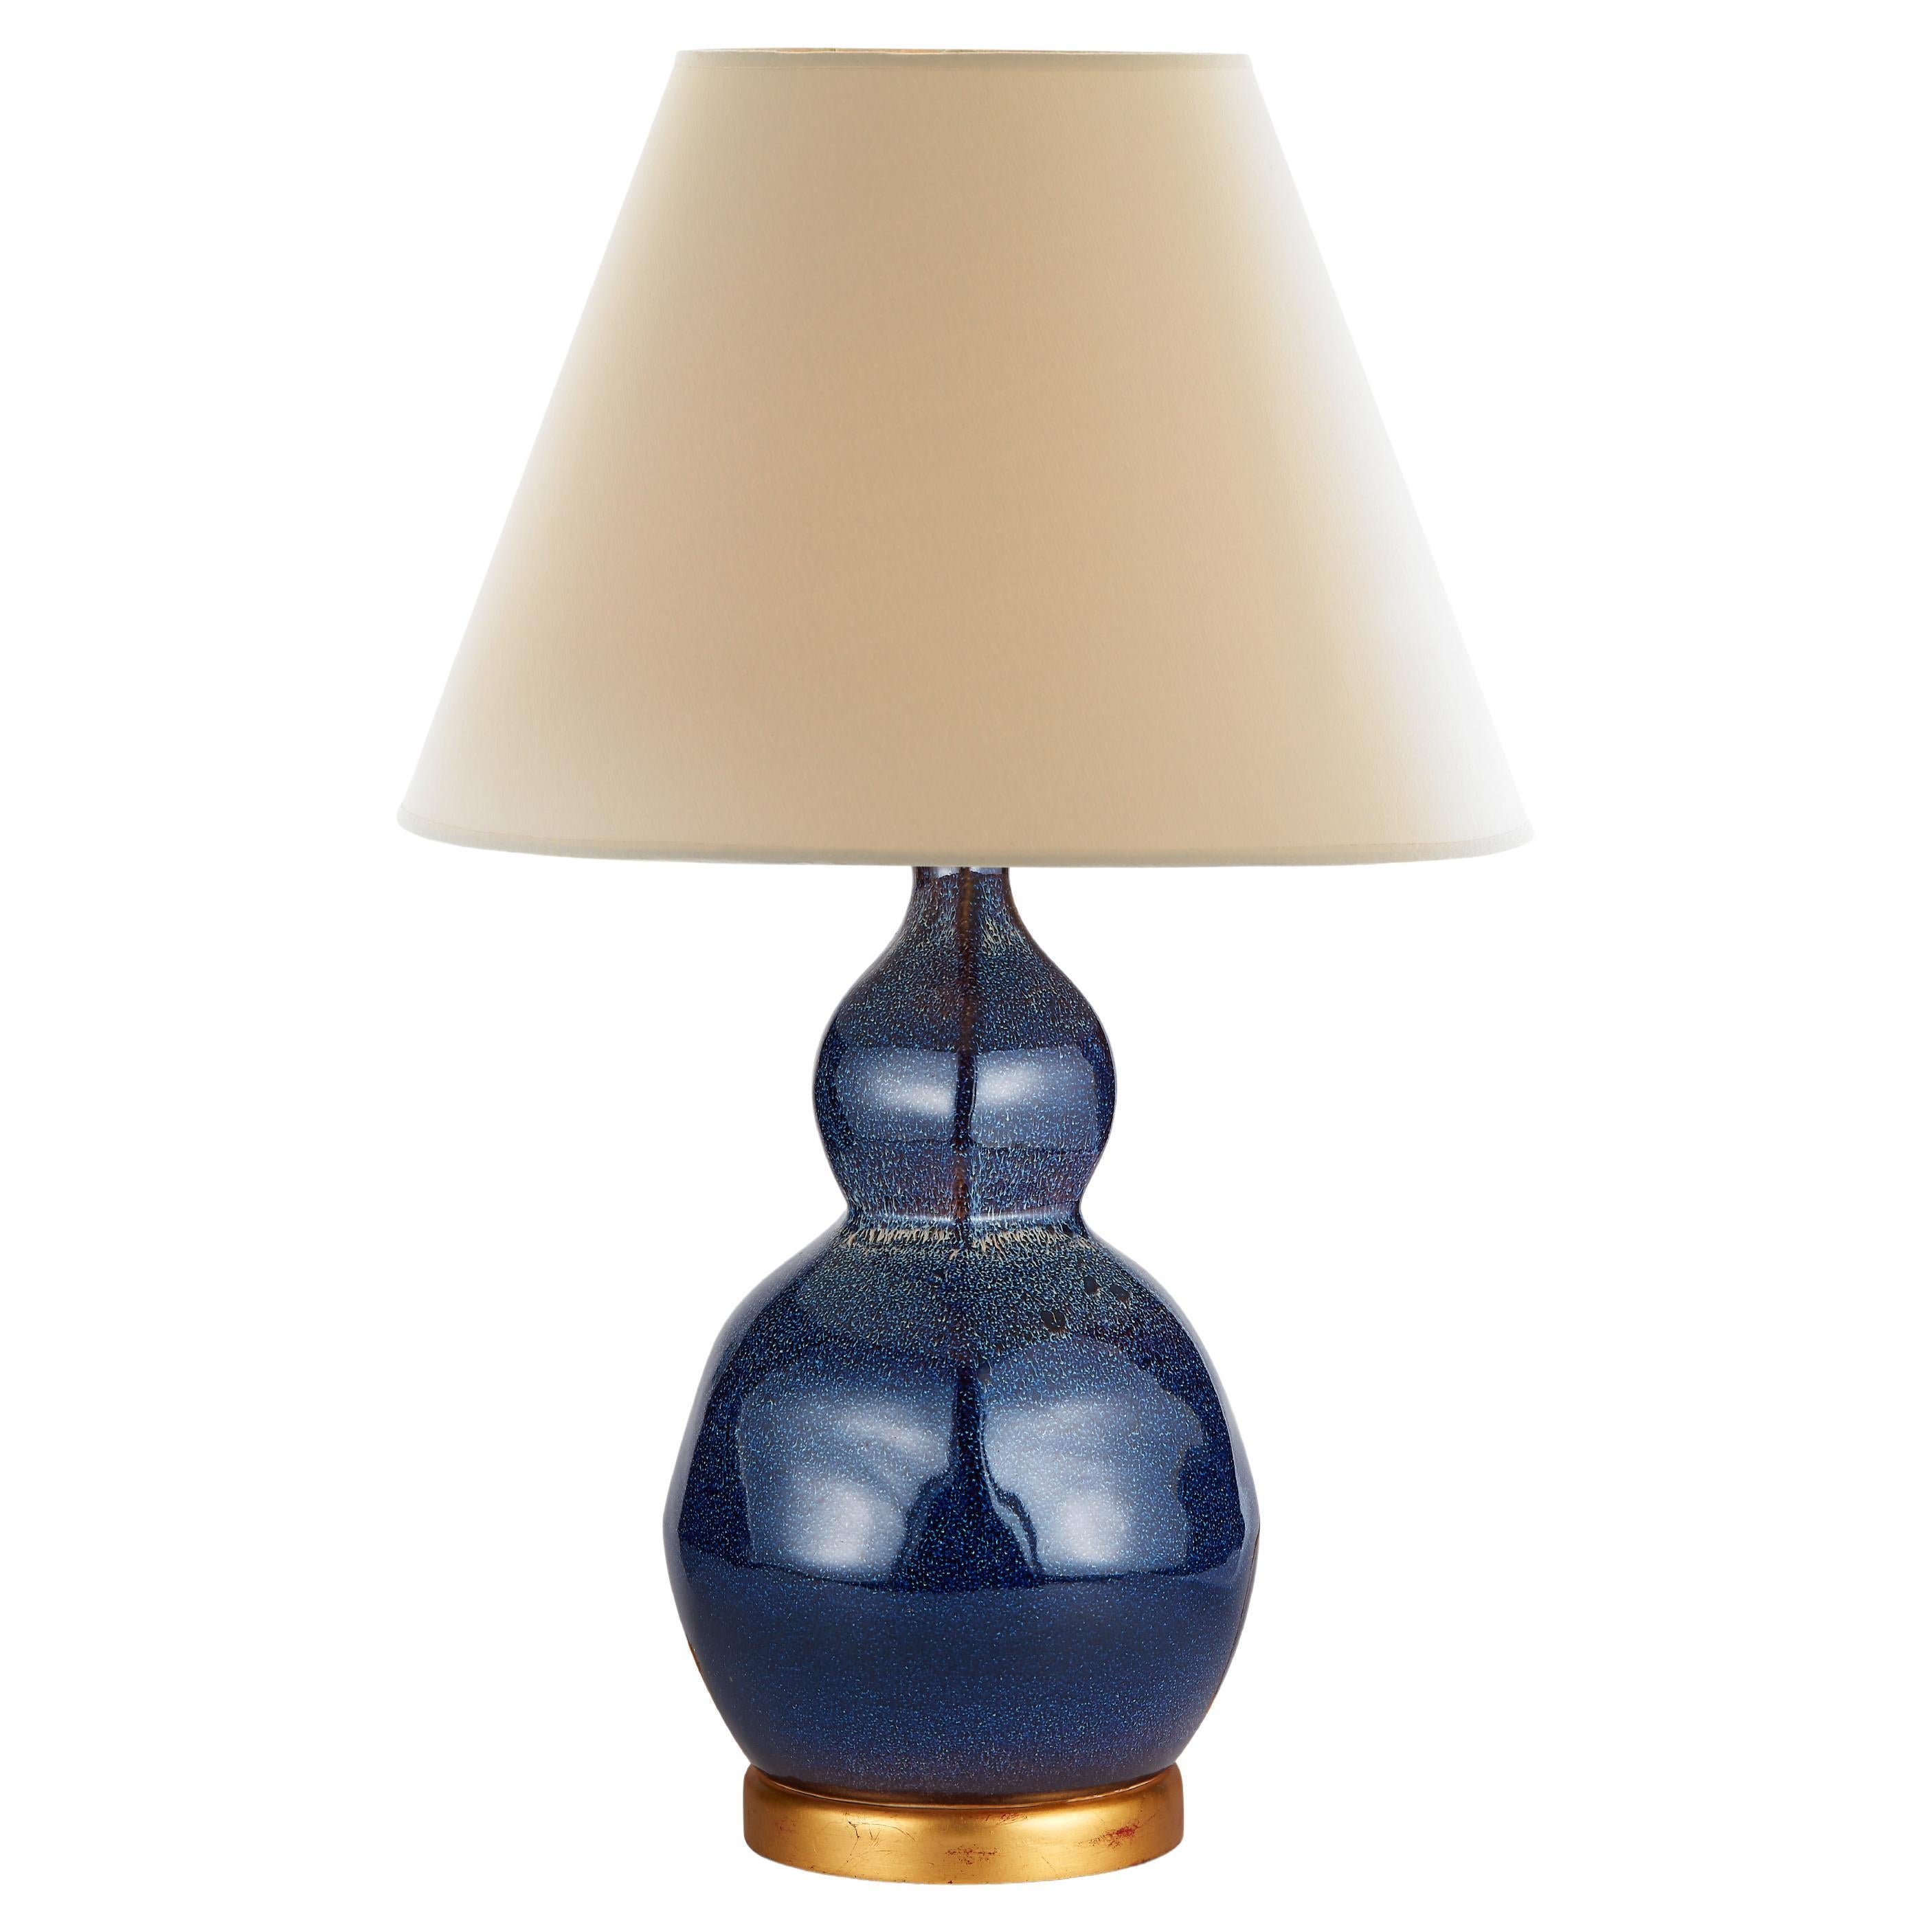 Bunny Williams Home Small Speckled Lamp (Indigo) For Sale